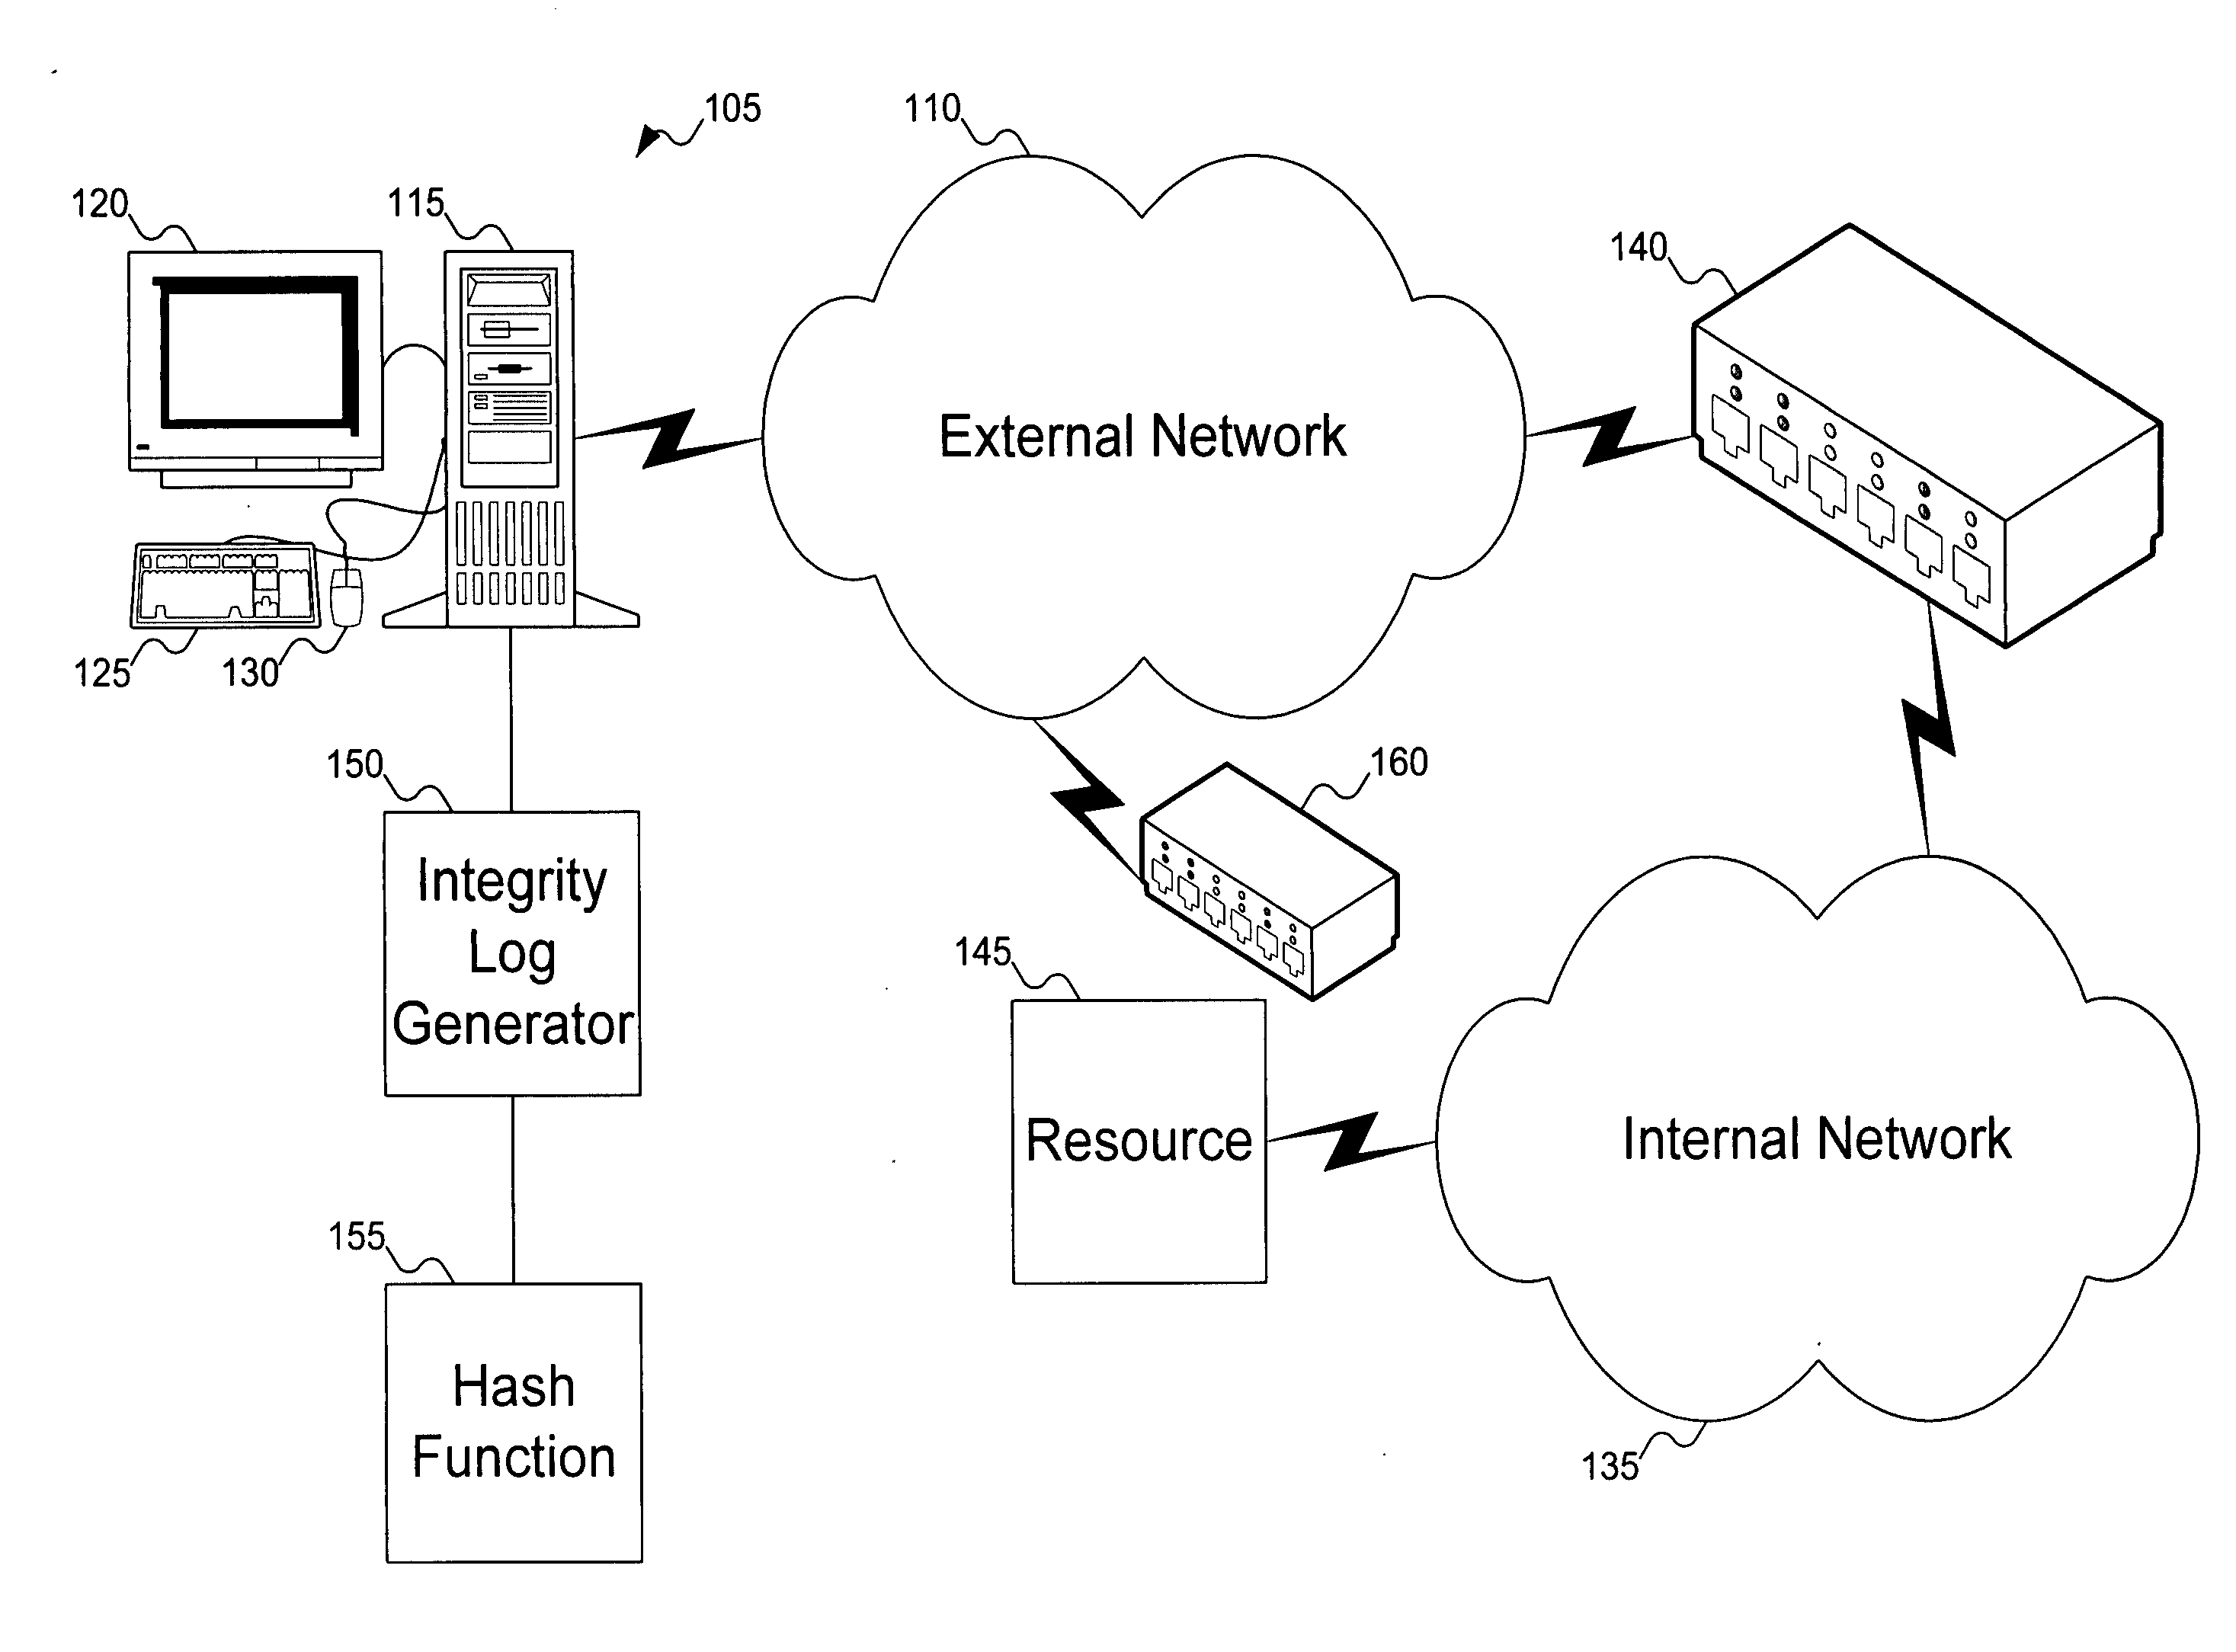 Method to control access between network endpoints based on trust scores calculated from information system component analysis